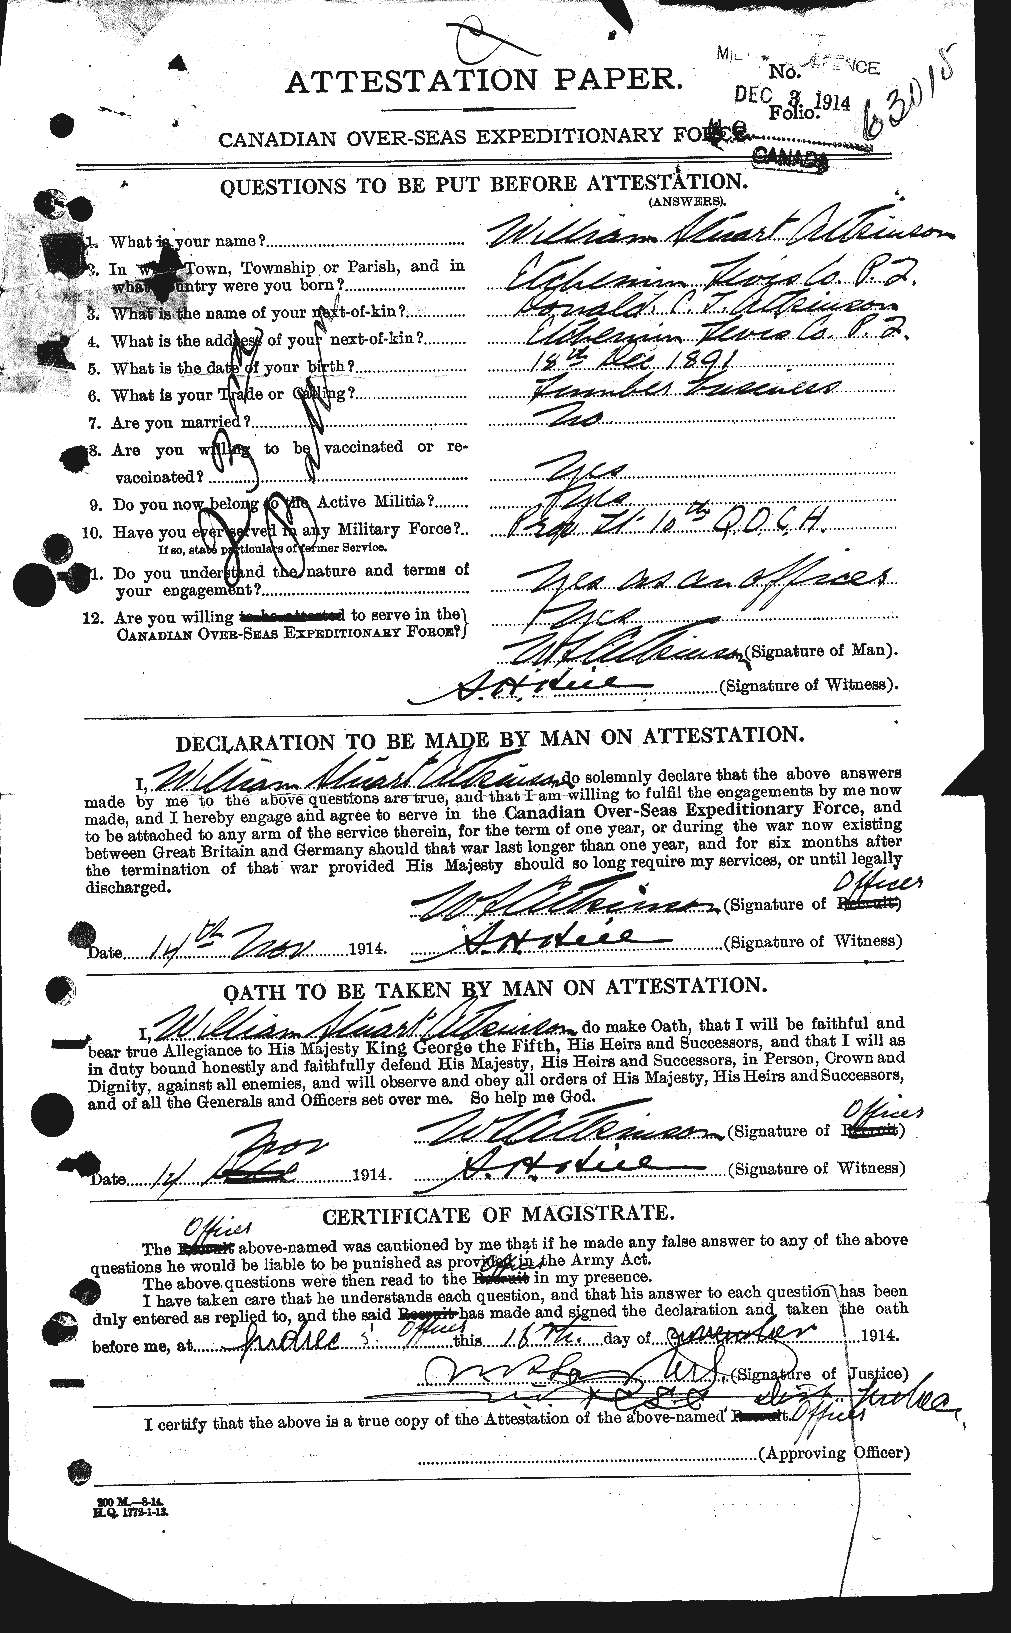 Personnel Records of the First World War - CEF 224168a